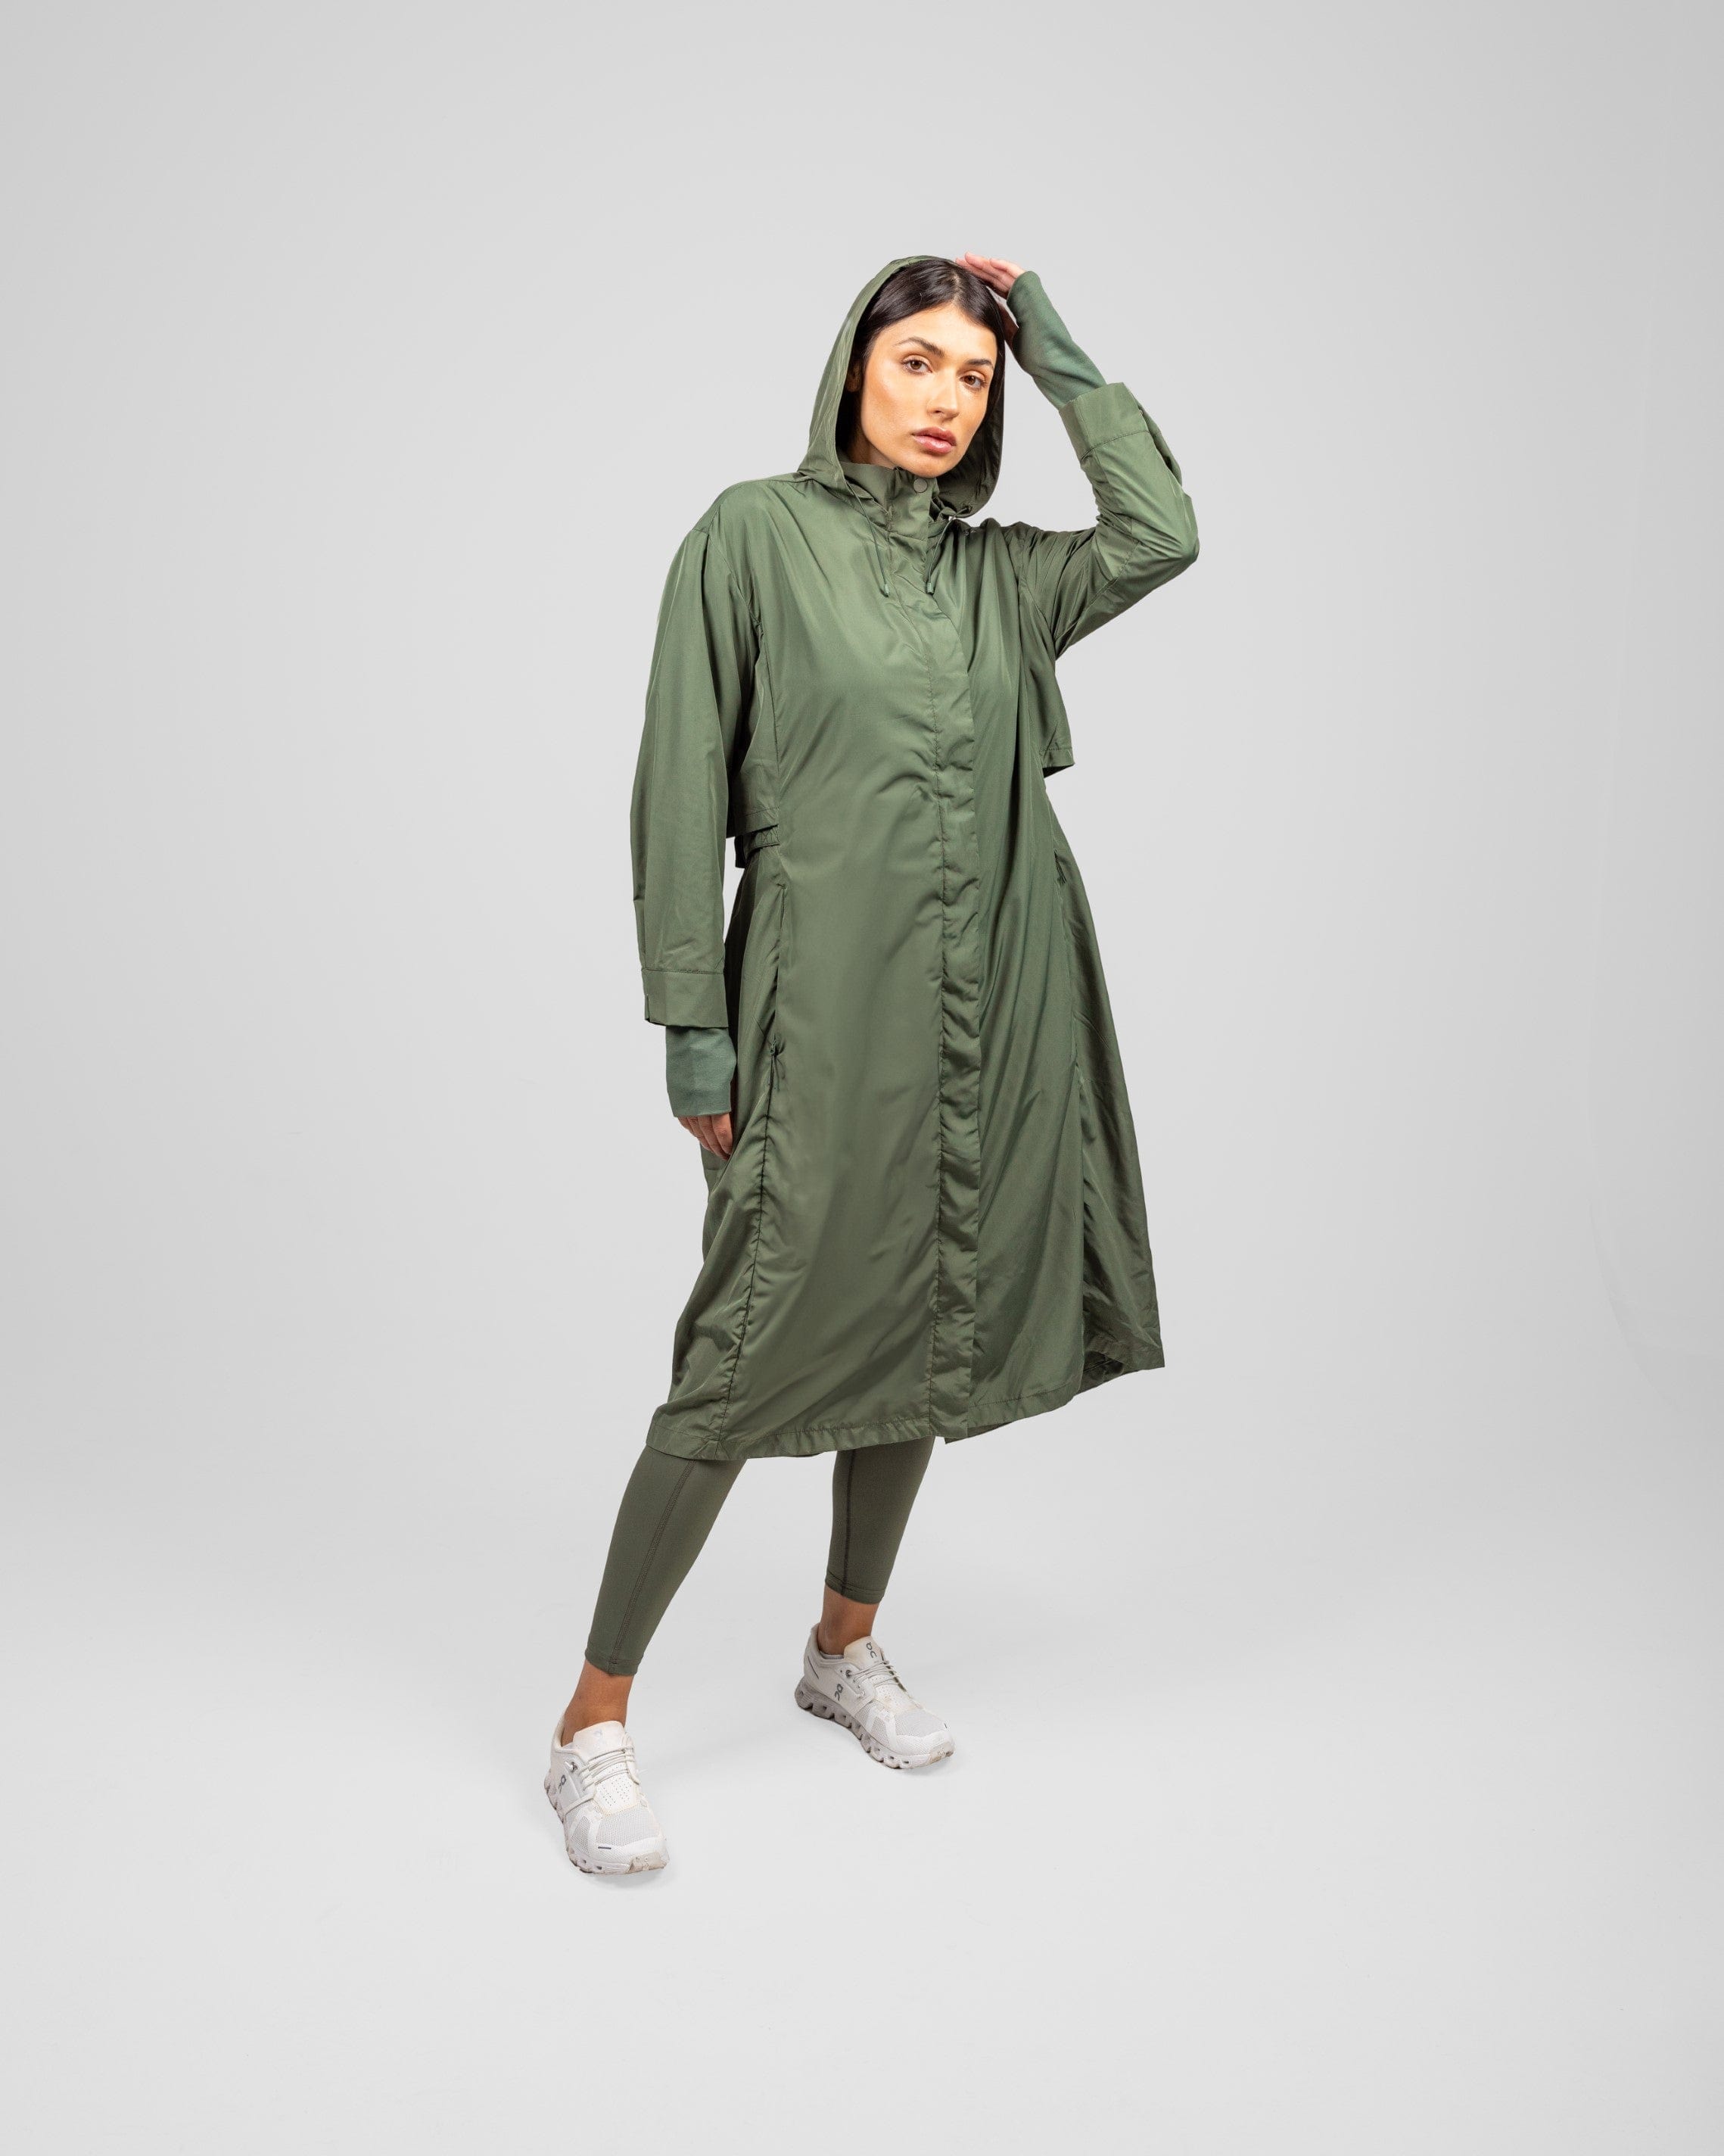 A model in an Olive MAK LIGHT PARKA by Qynda made of lightweight fabric and leggings, posing with one hand on her head, standing against a light gray background.